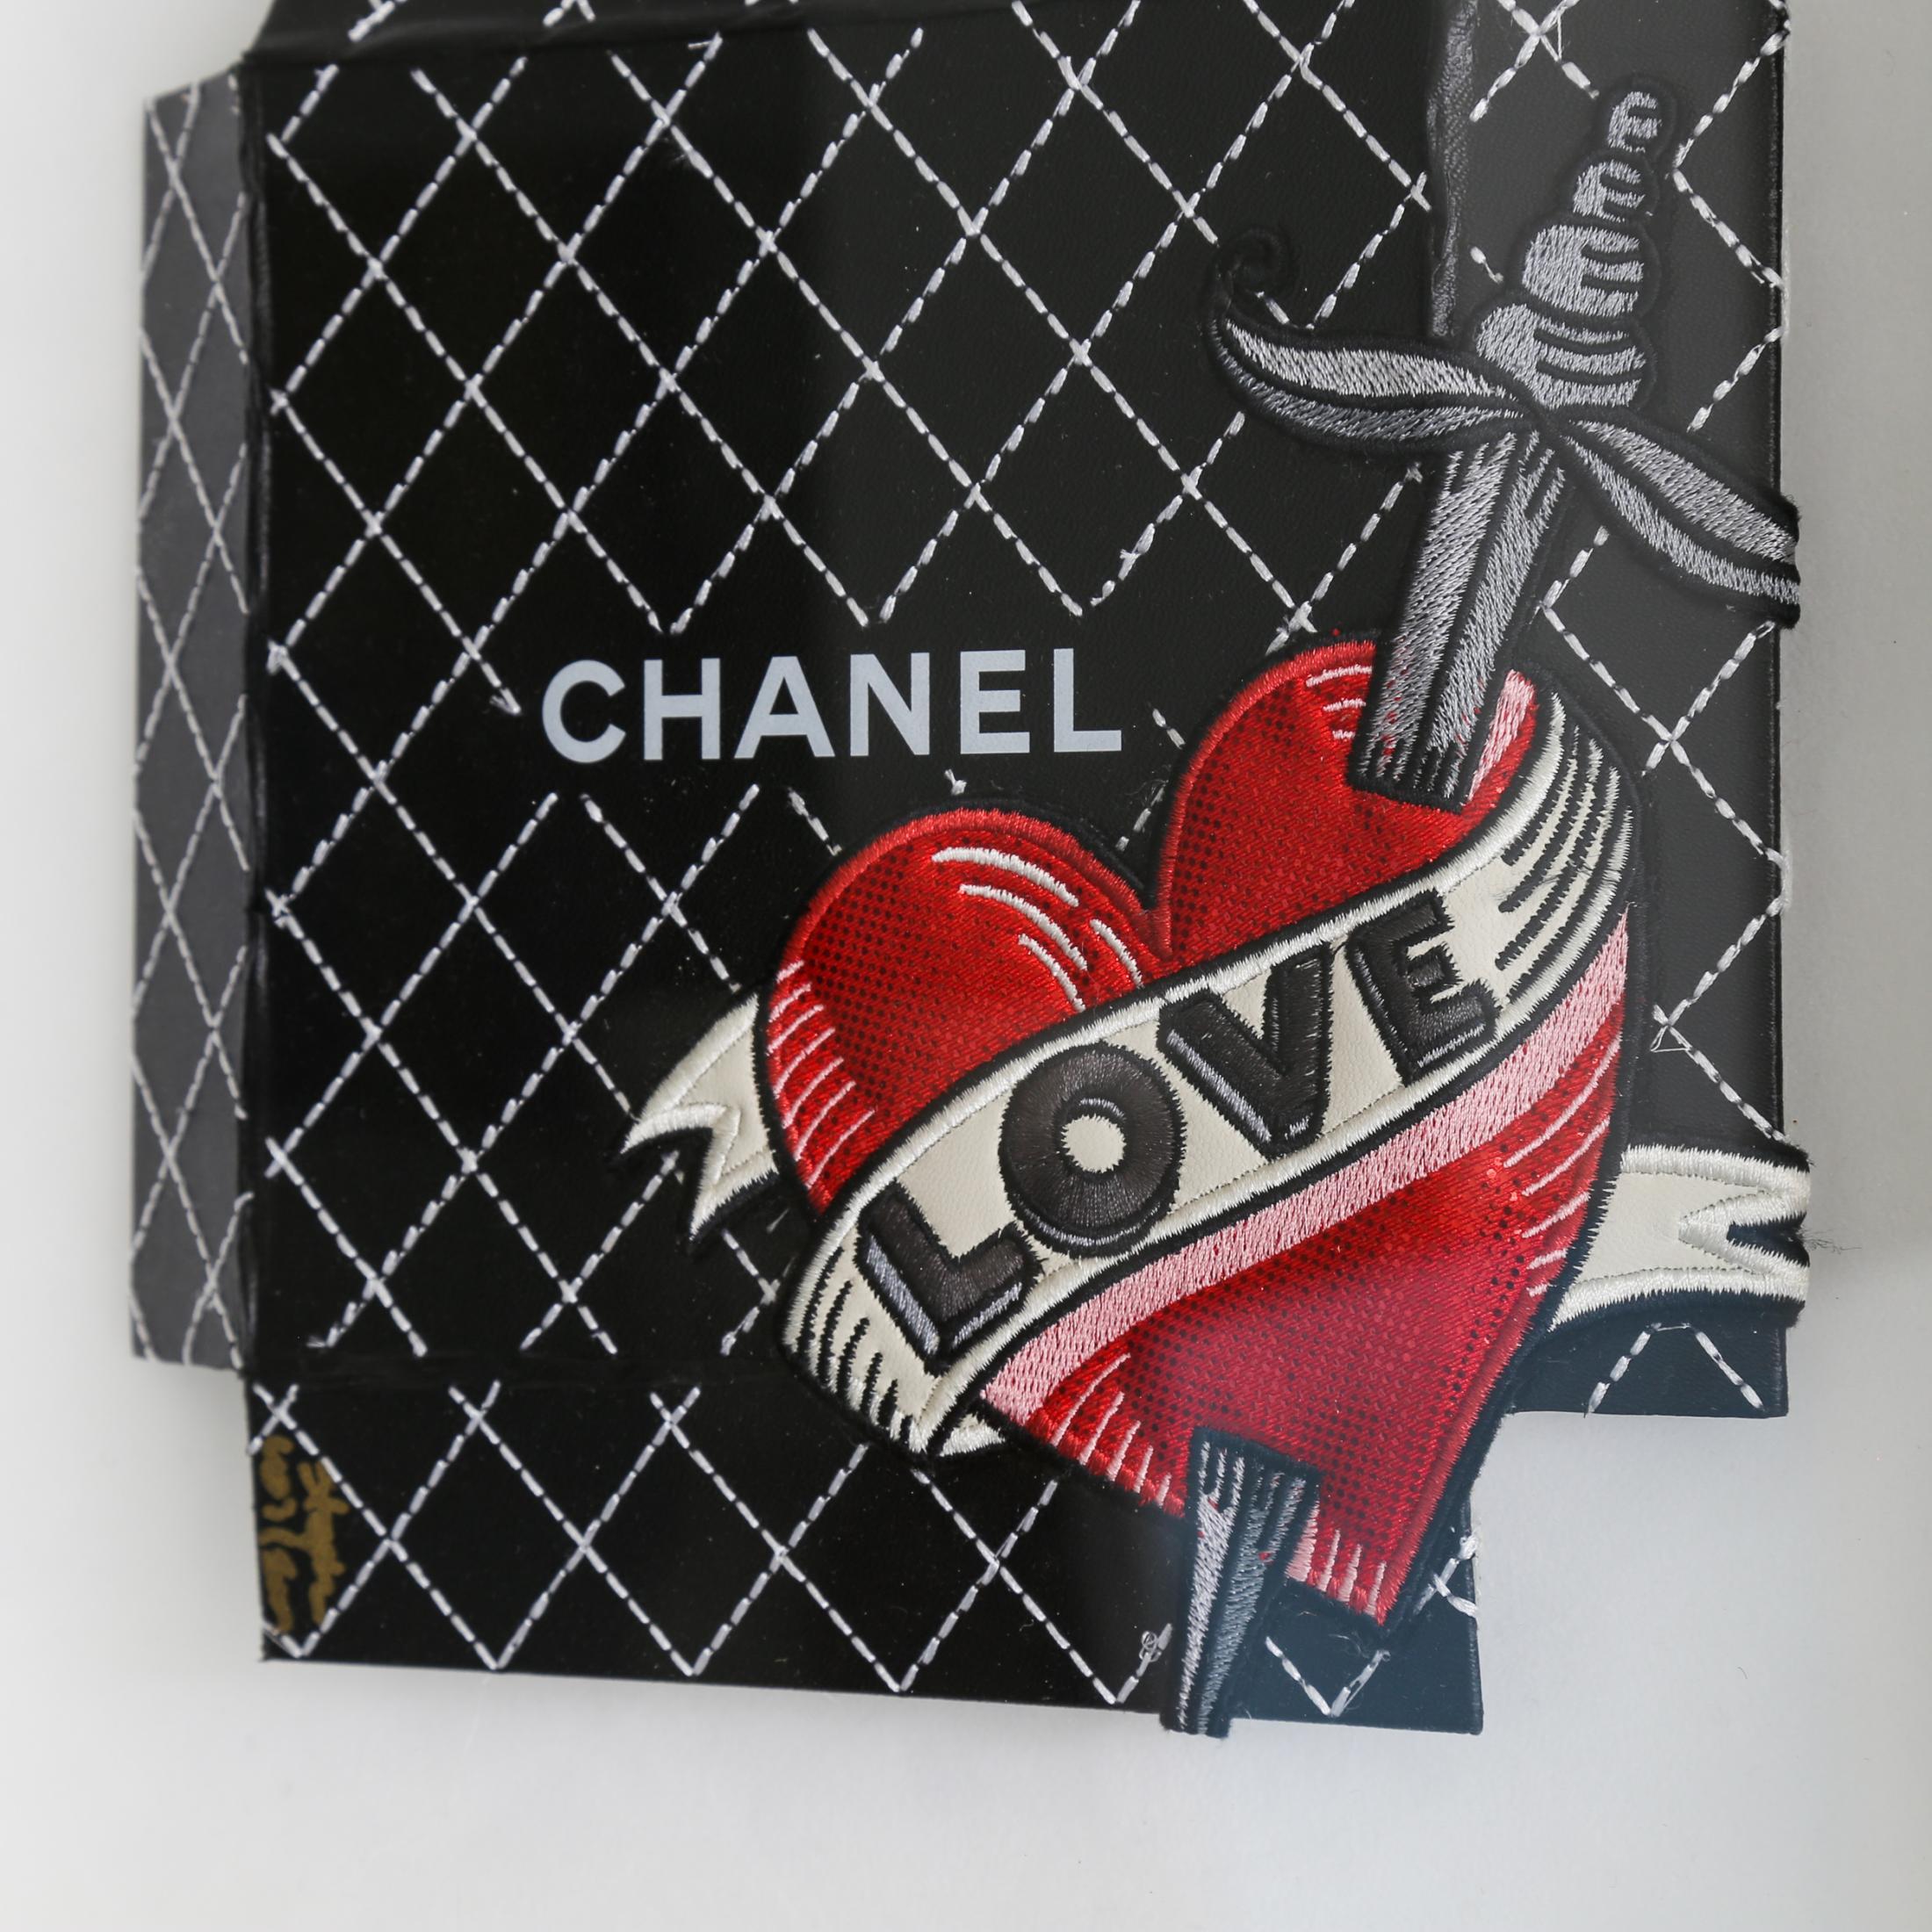 Chanel Love - Contemporary Art by Stephen Wilson